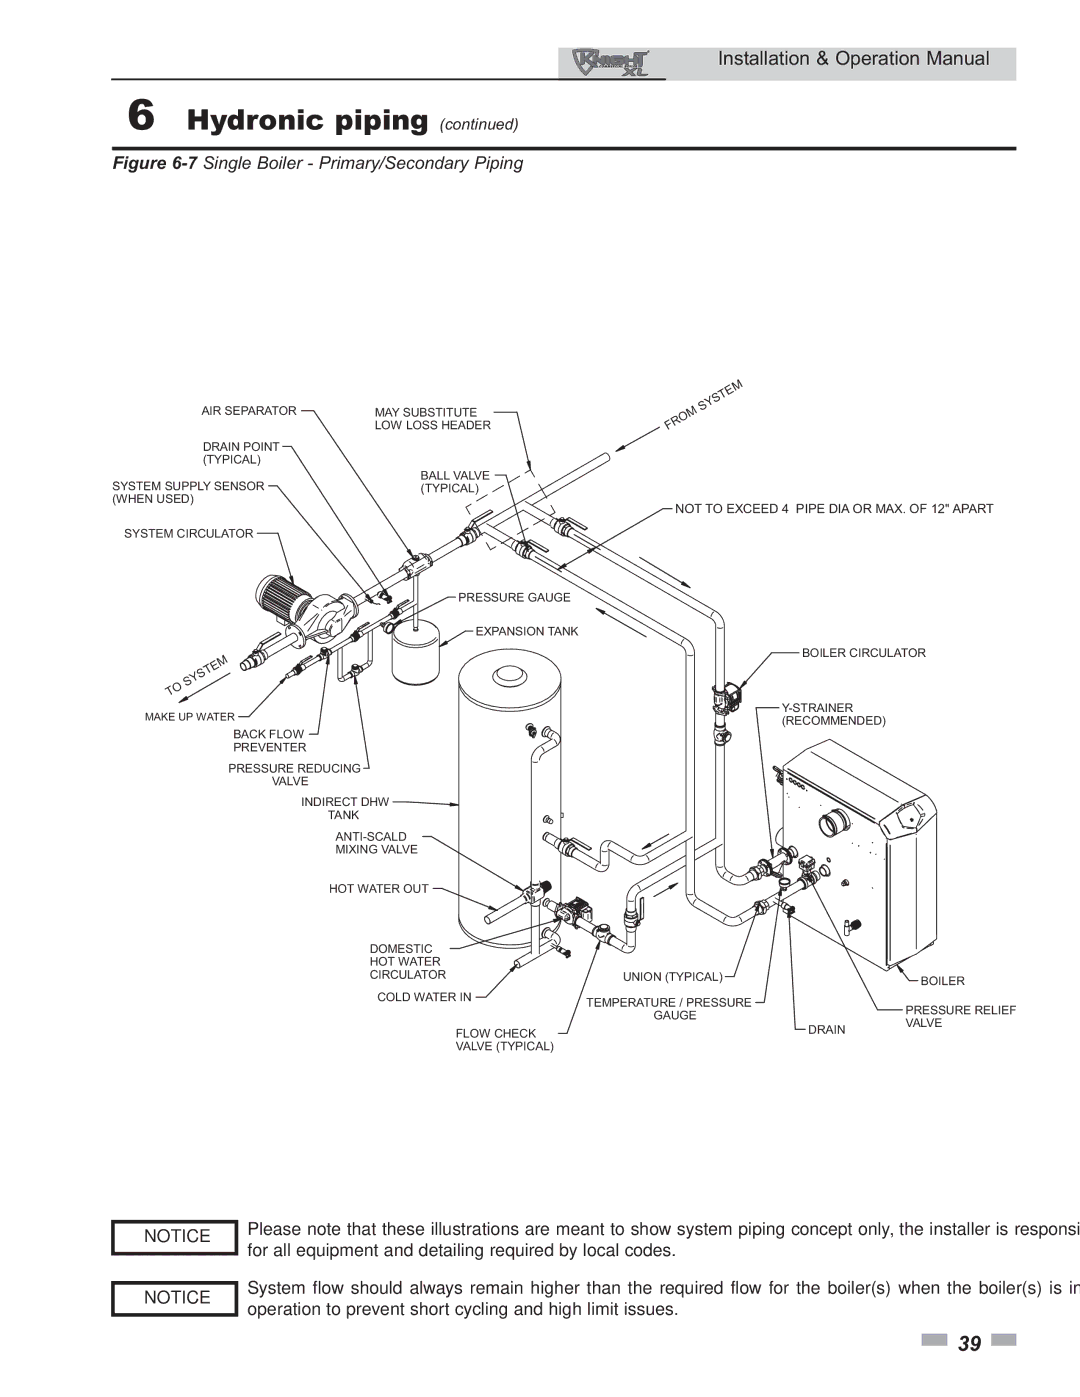 Lochinvar 800 operation manual 7Single Boiler Primary/Secondary Piping 